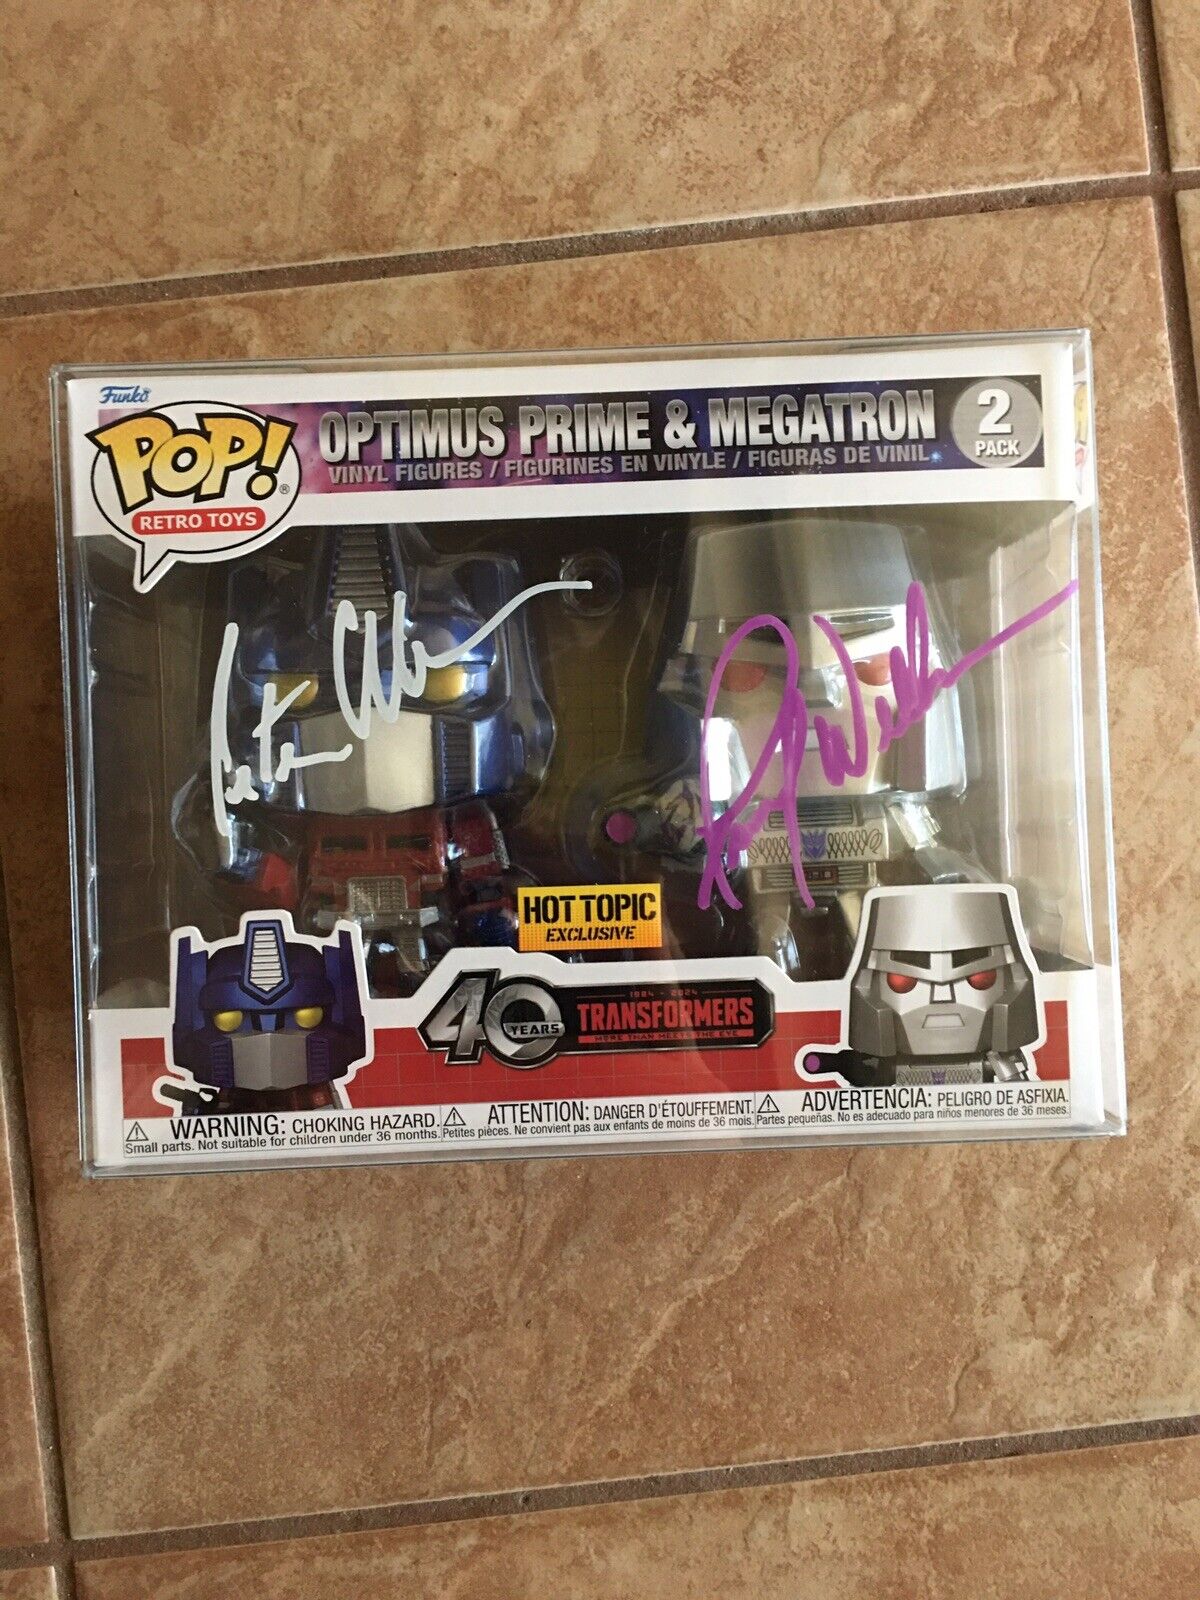 Funko Pop Autographed Transformers 2 Pack Signed By Peter Cullen & Frank Welker